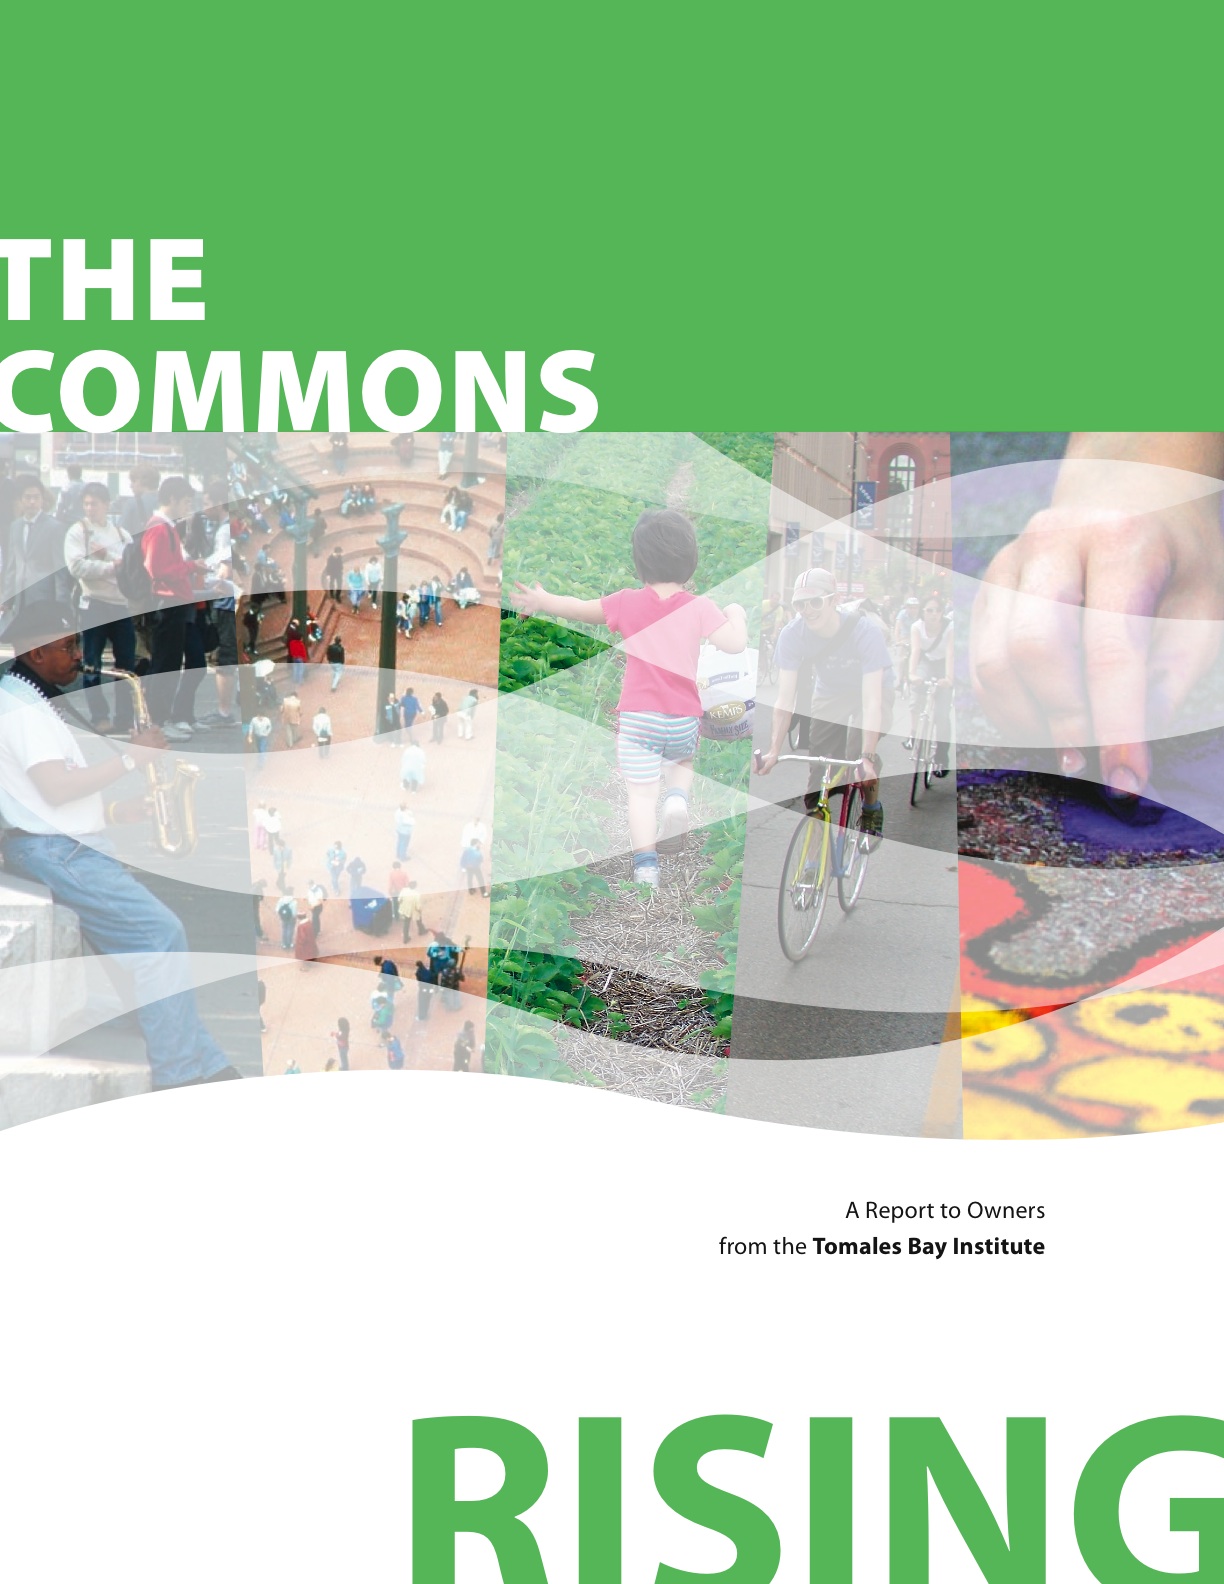 The Commons Rising